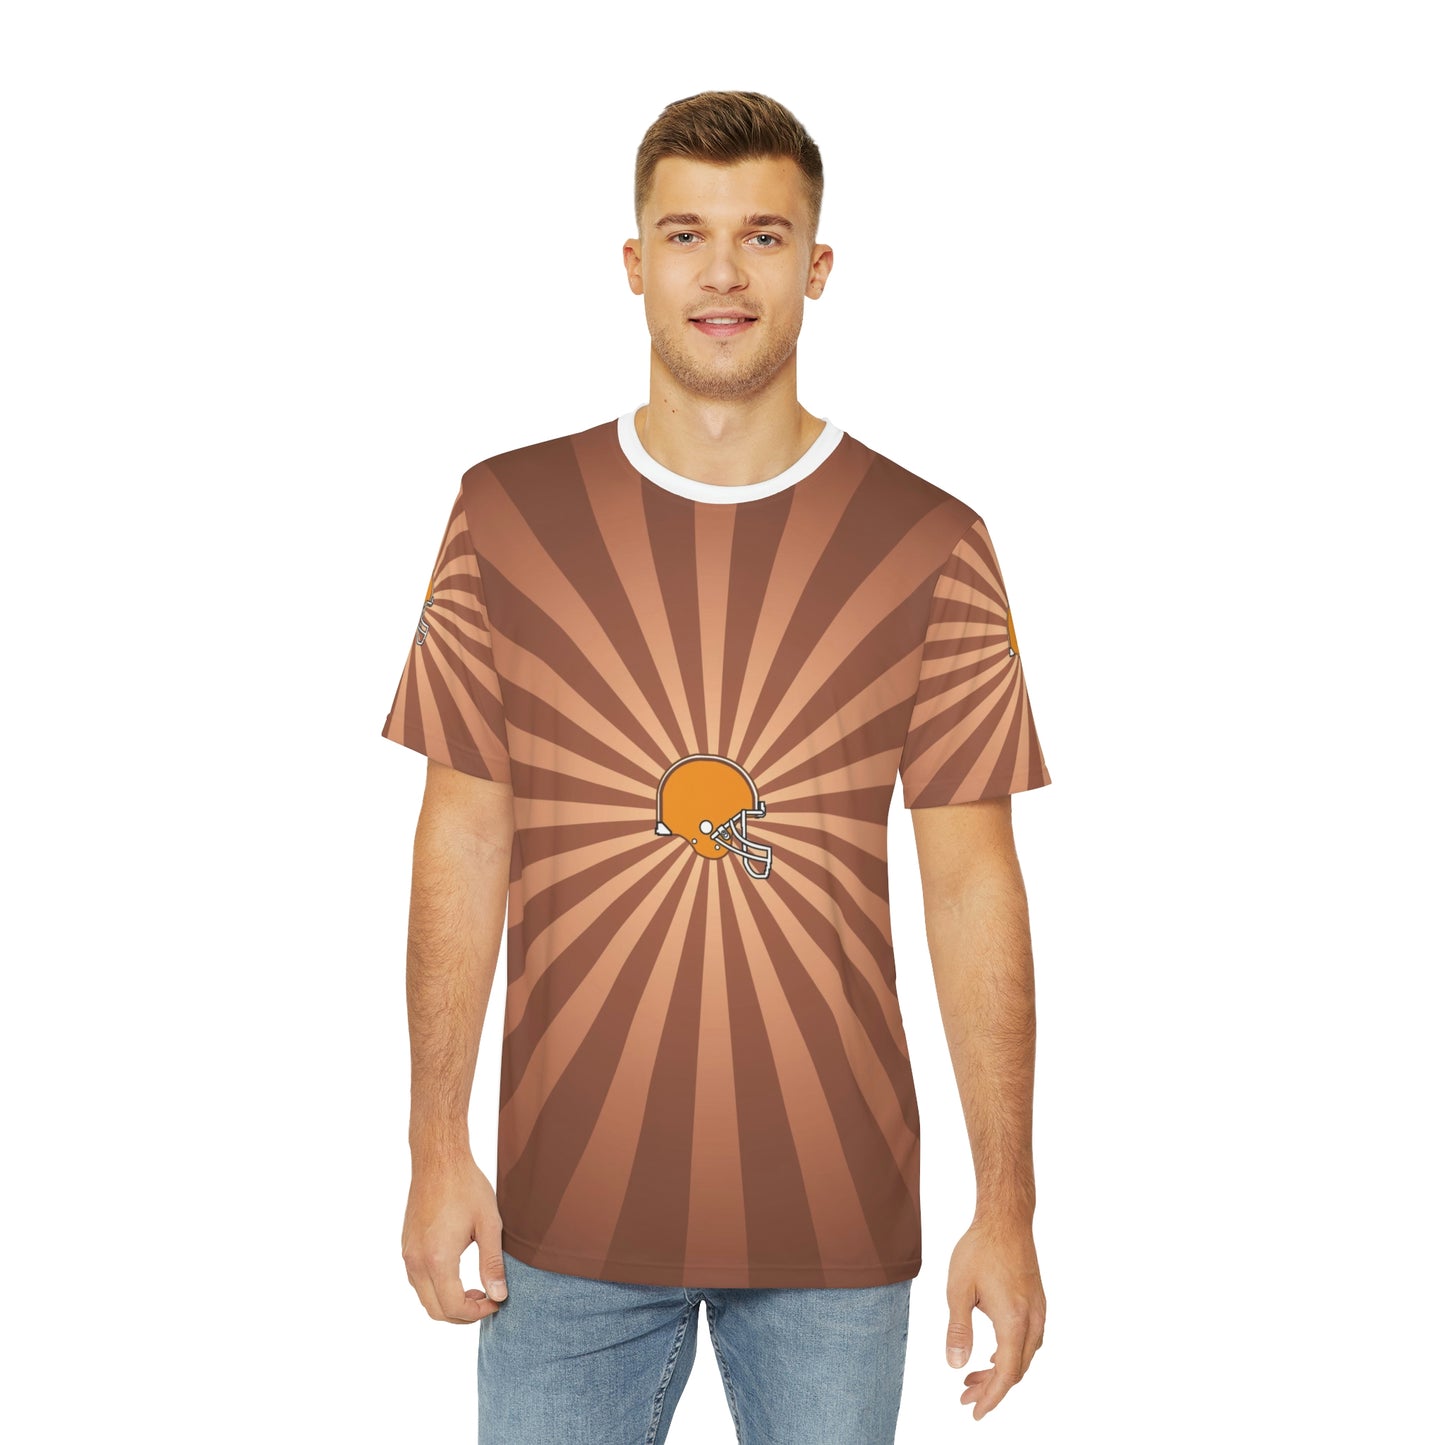 Geotrott NFL Cleveland Browns Men's Polyester All Over Print Tee T-Shirt